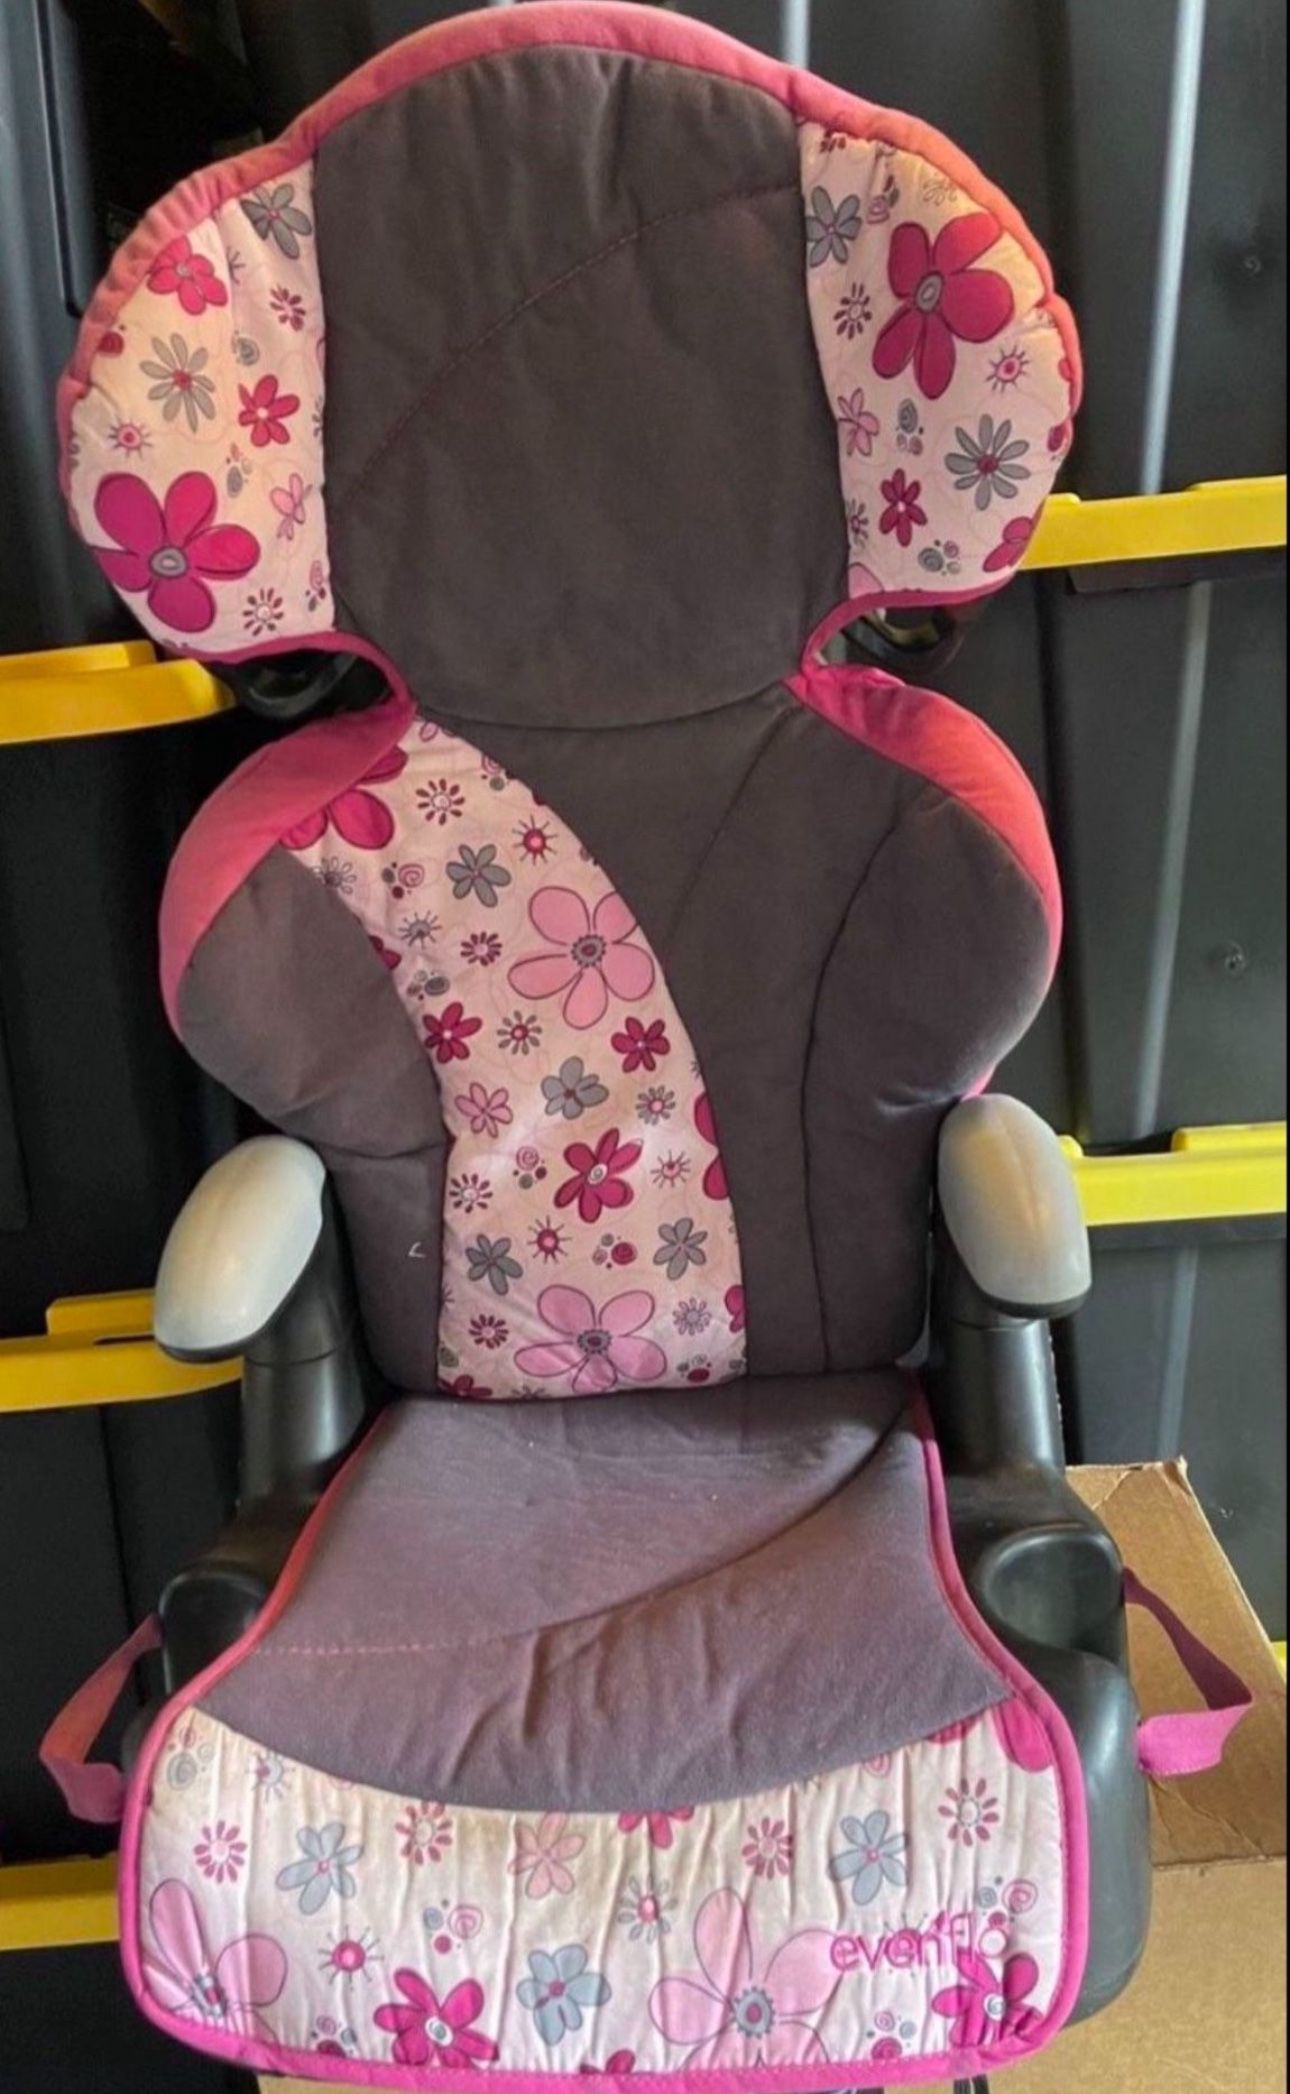 Booster Seat For Toddler